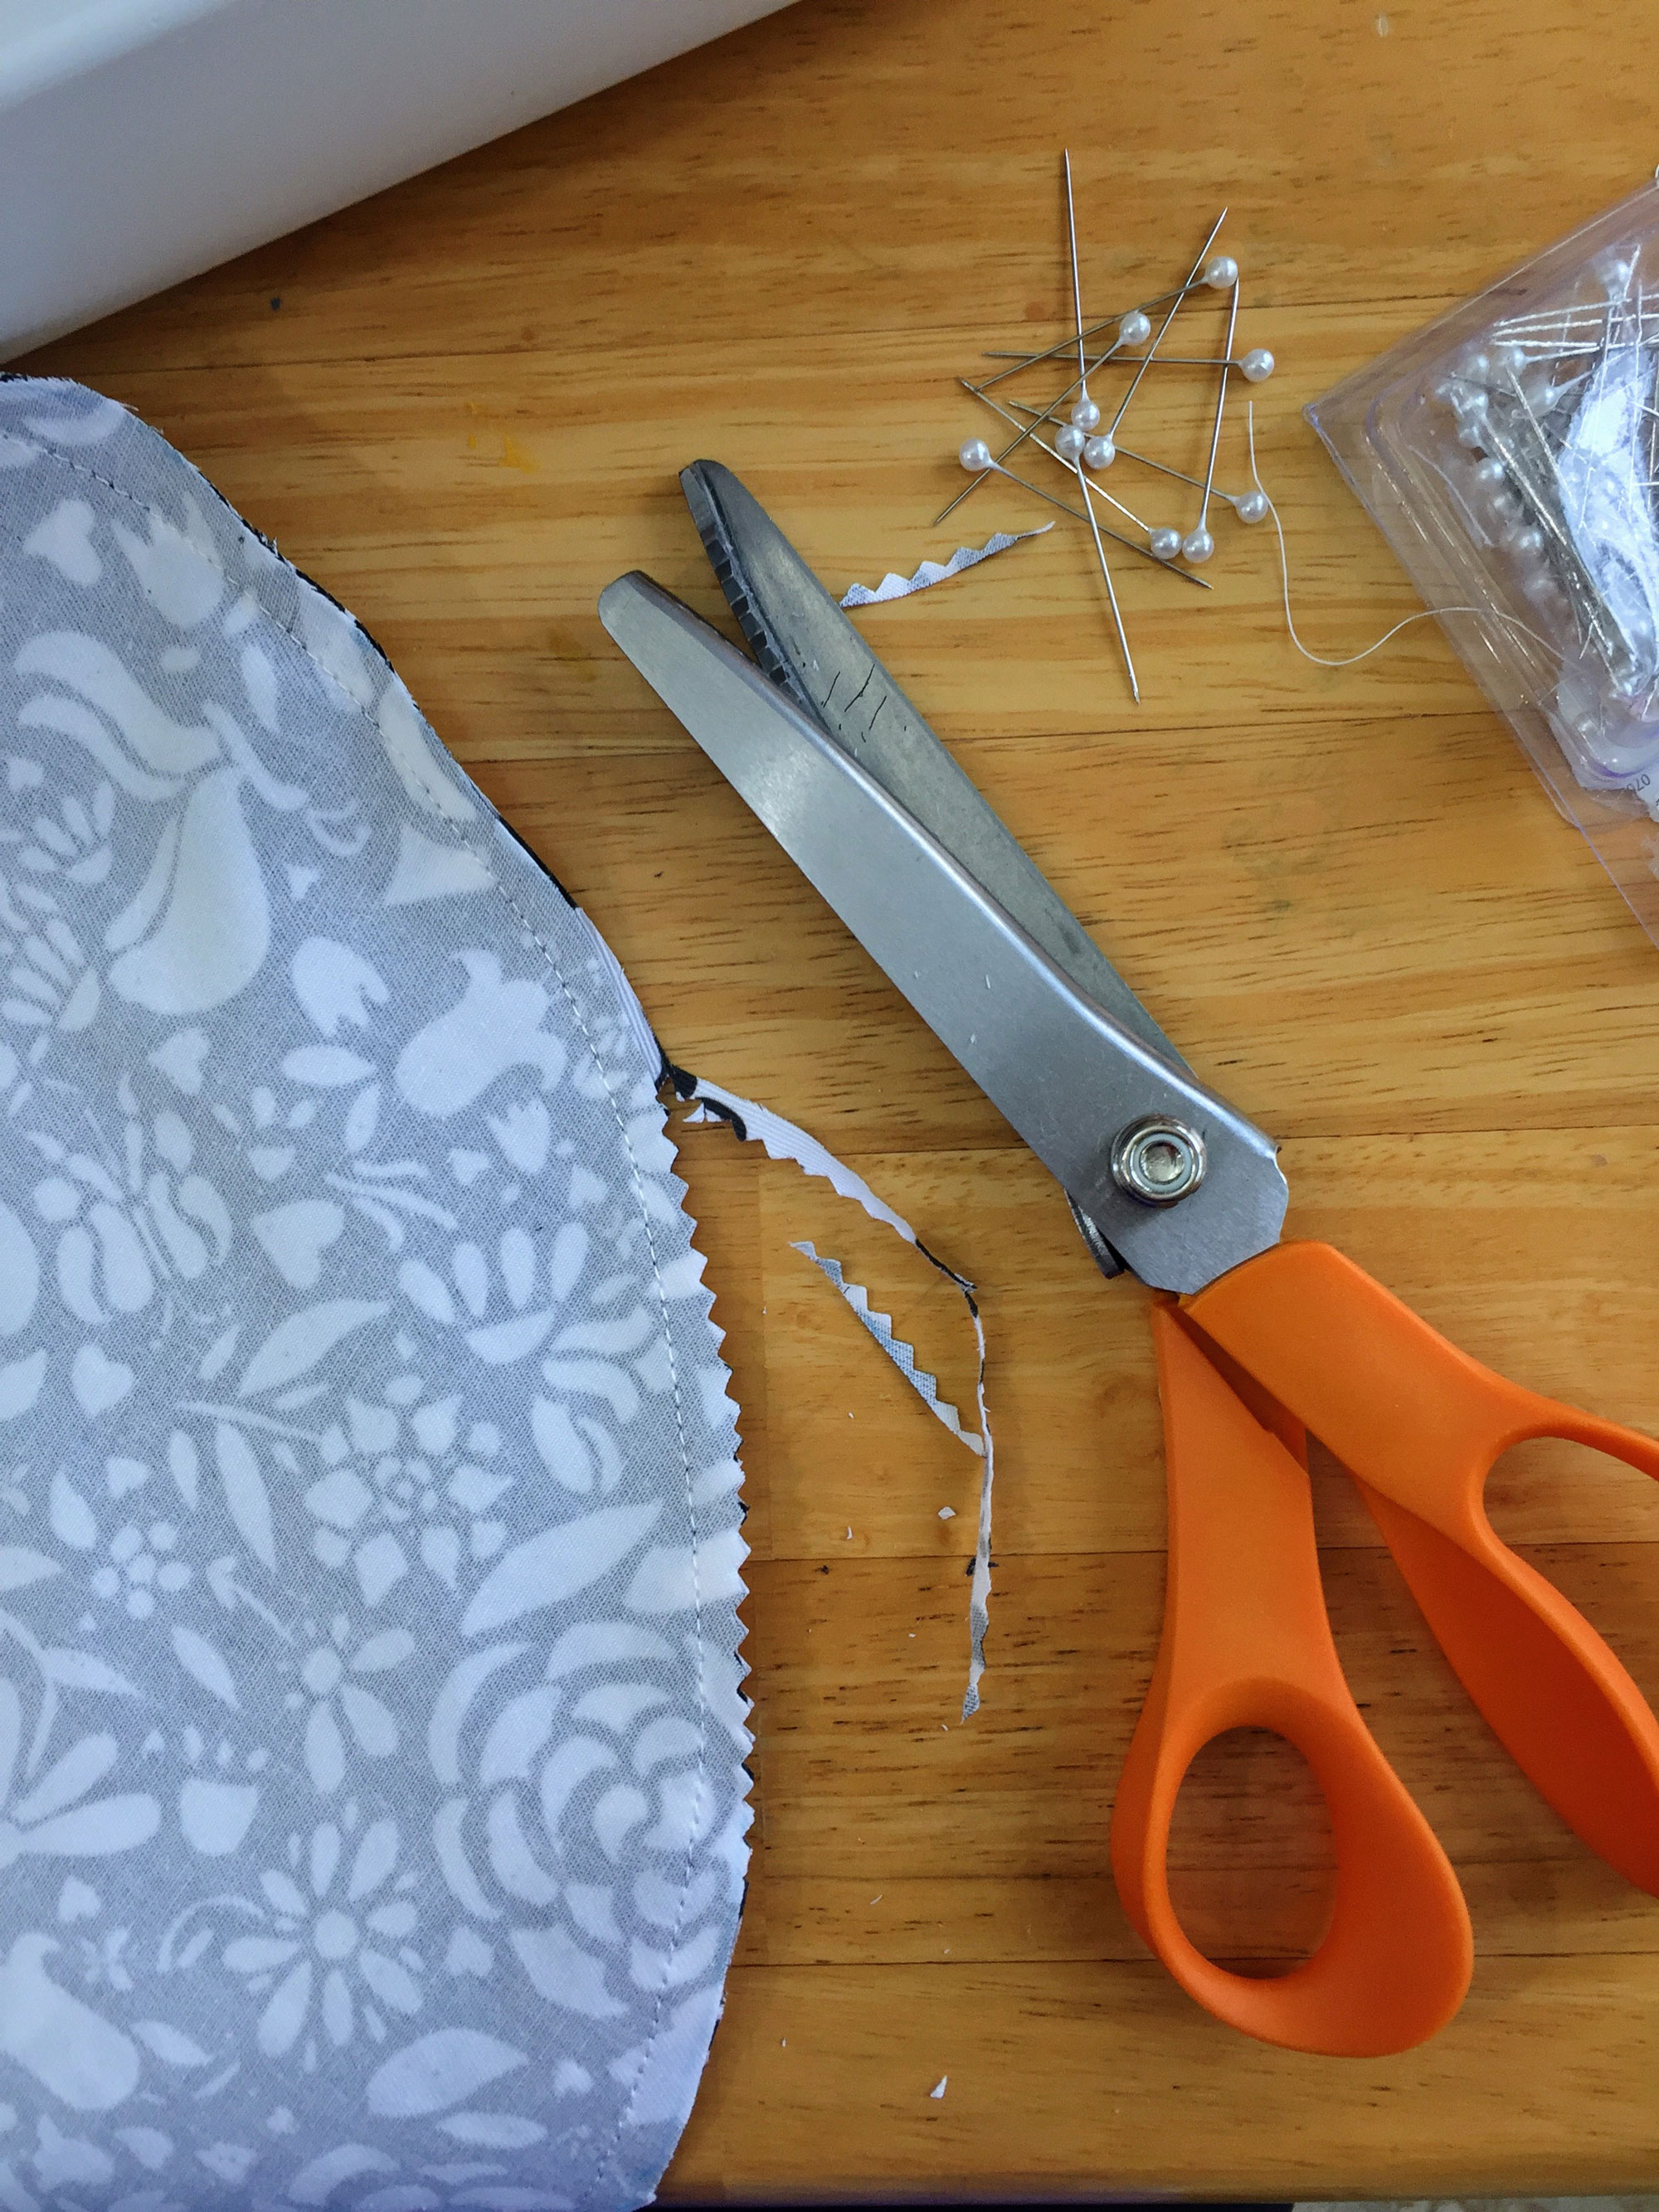 Pinking shears to trim excess fabric